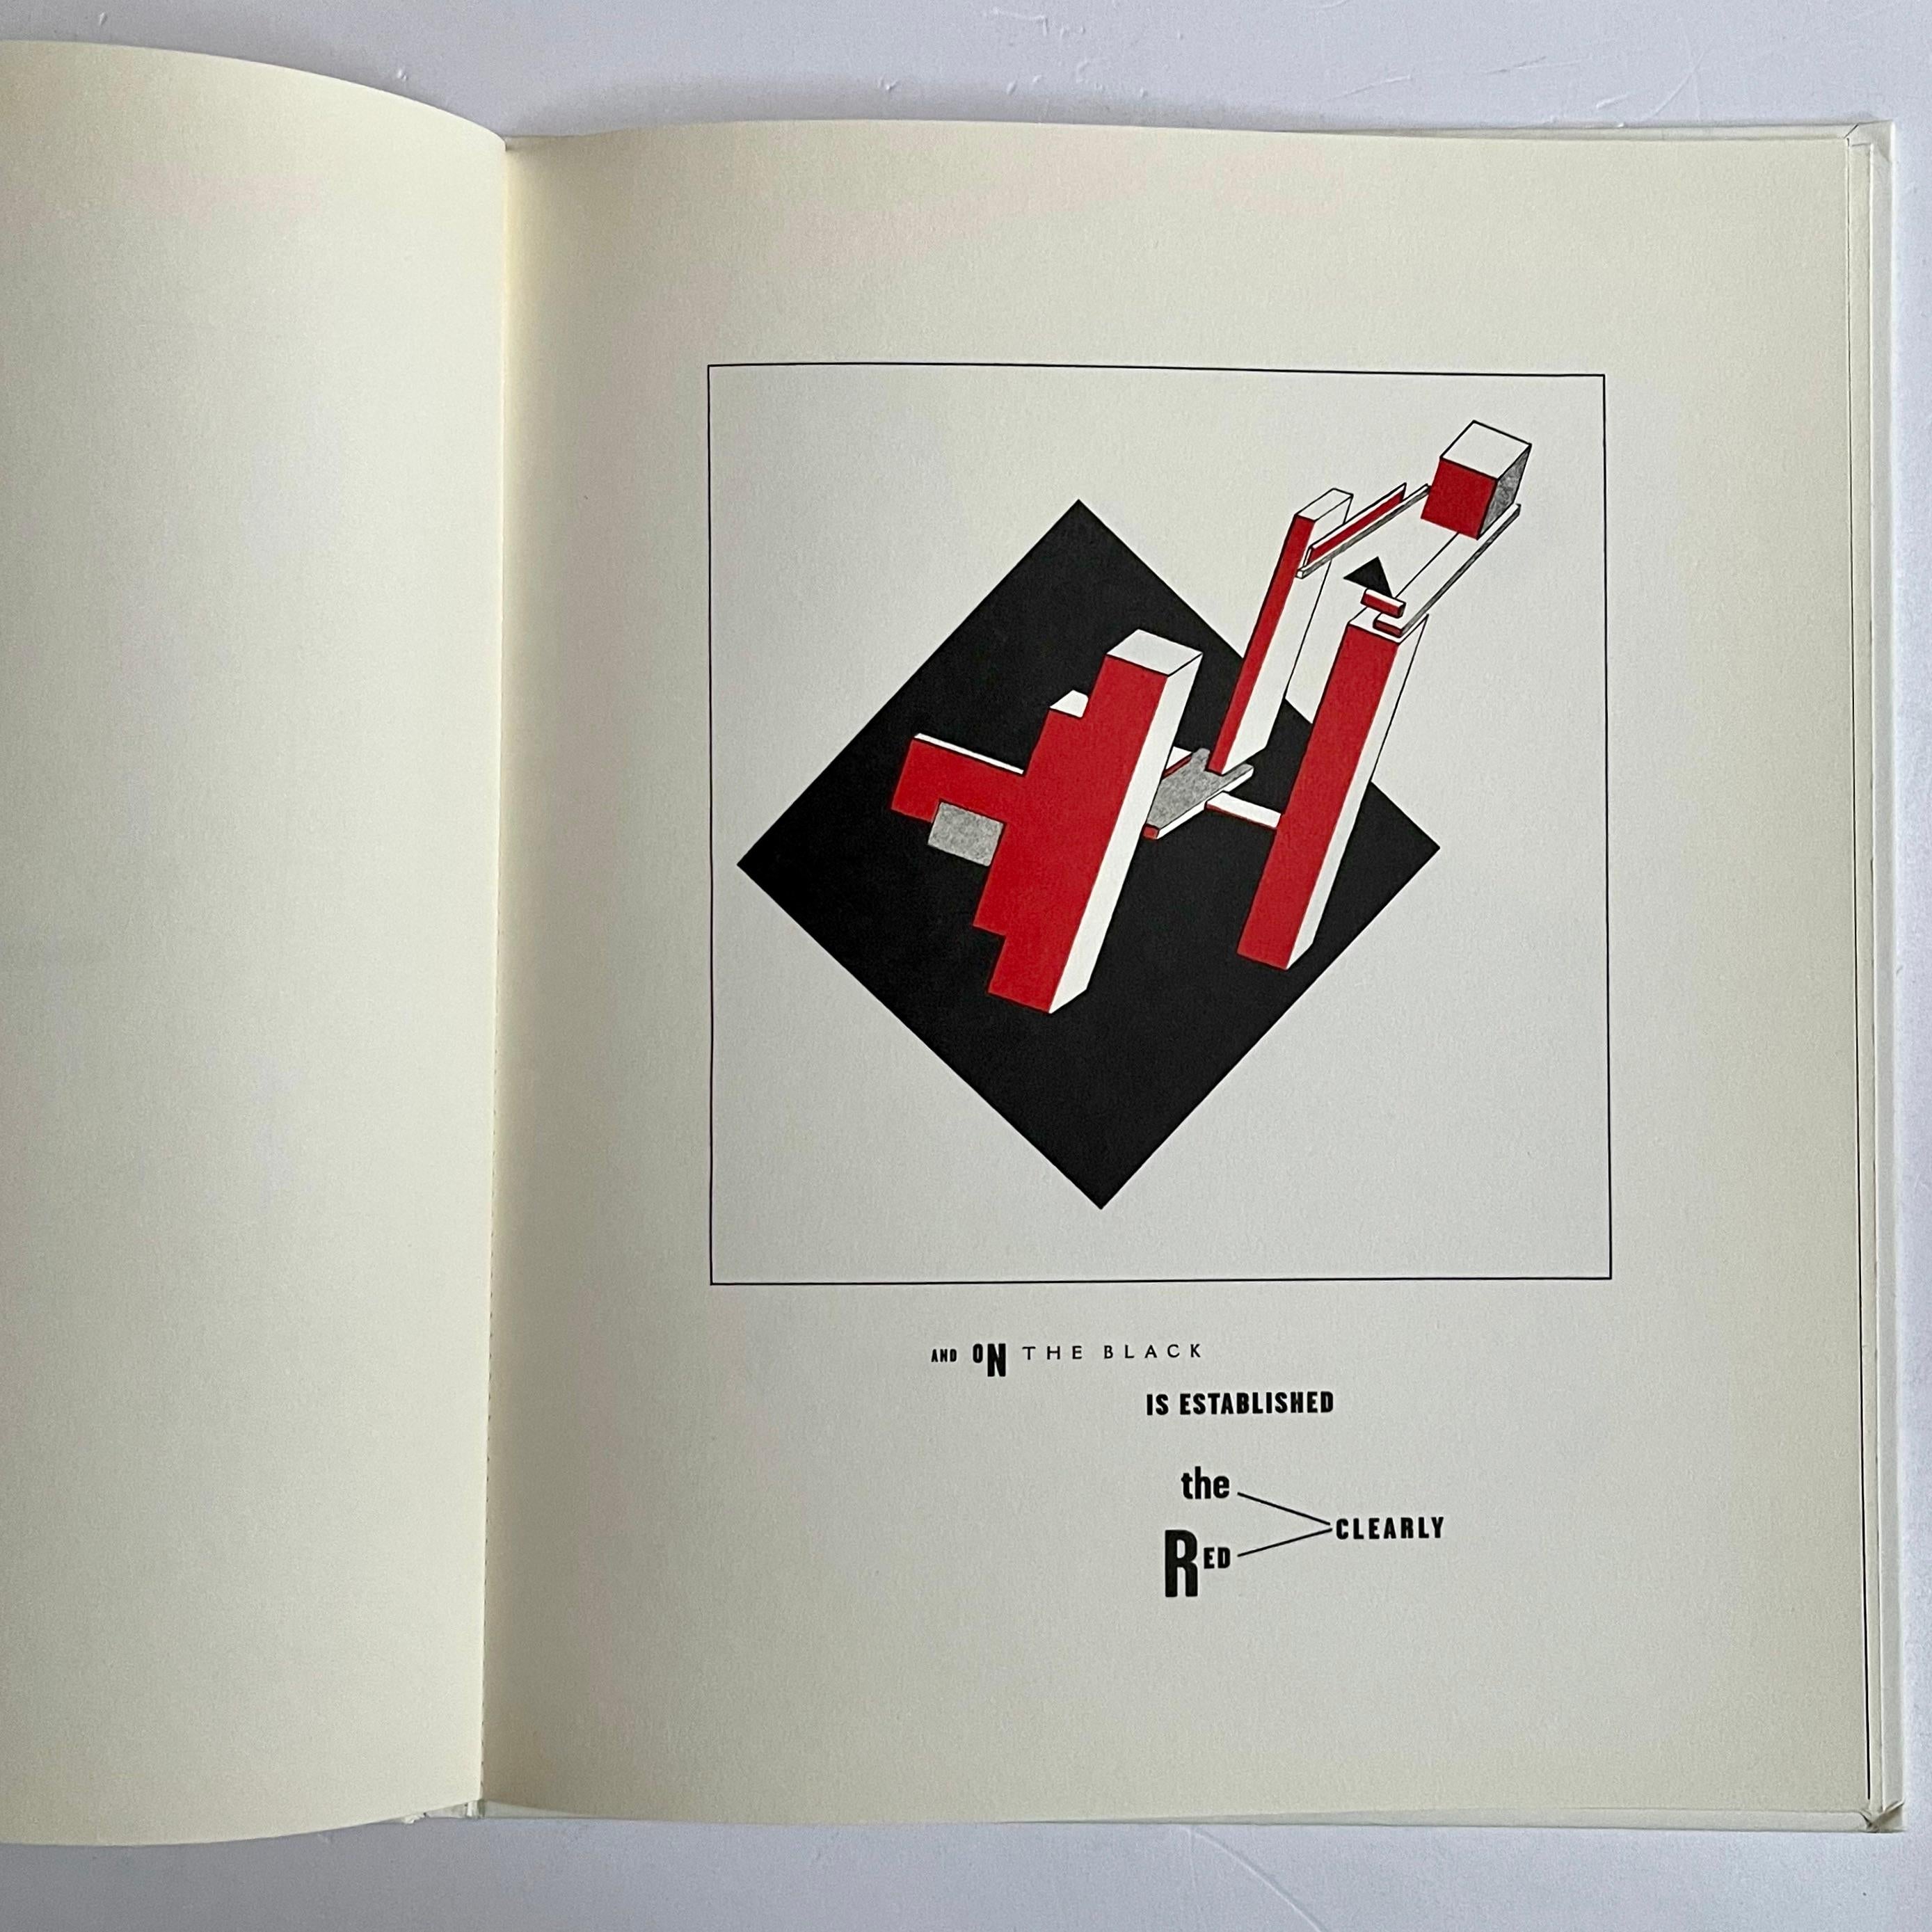 Published by Tate Publications 2014 

About Two Squares is a children’s book about a black square and a red square that fly to earth from afar. For Lissitzky they symbolized the superiority of the new Soviet order (the red square) over the old (the